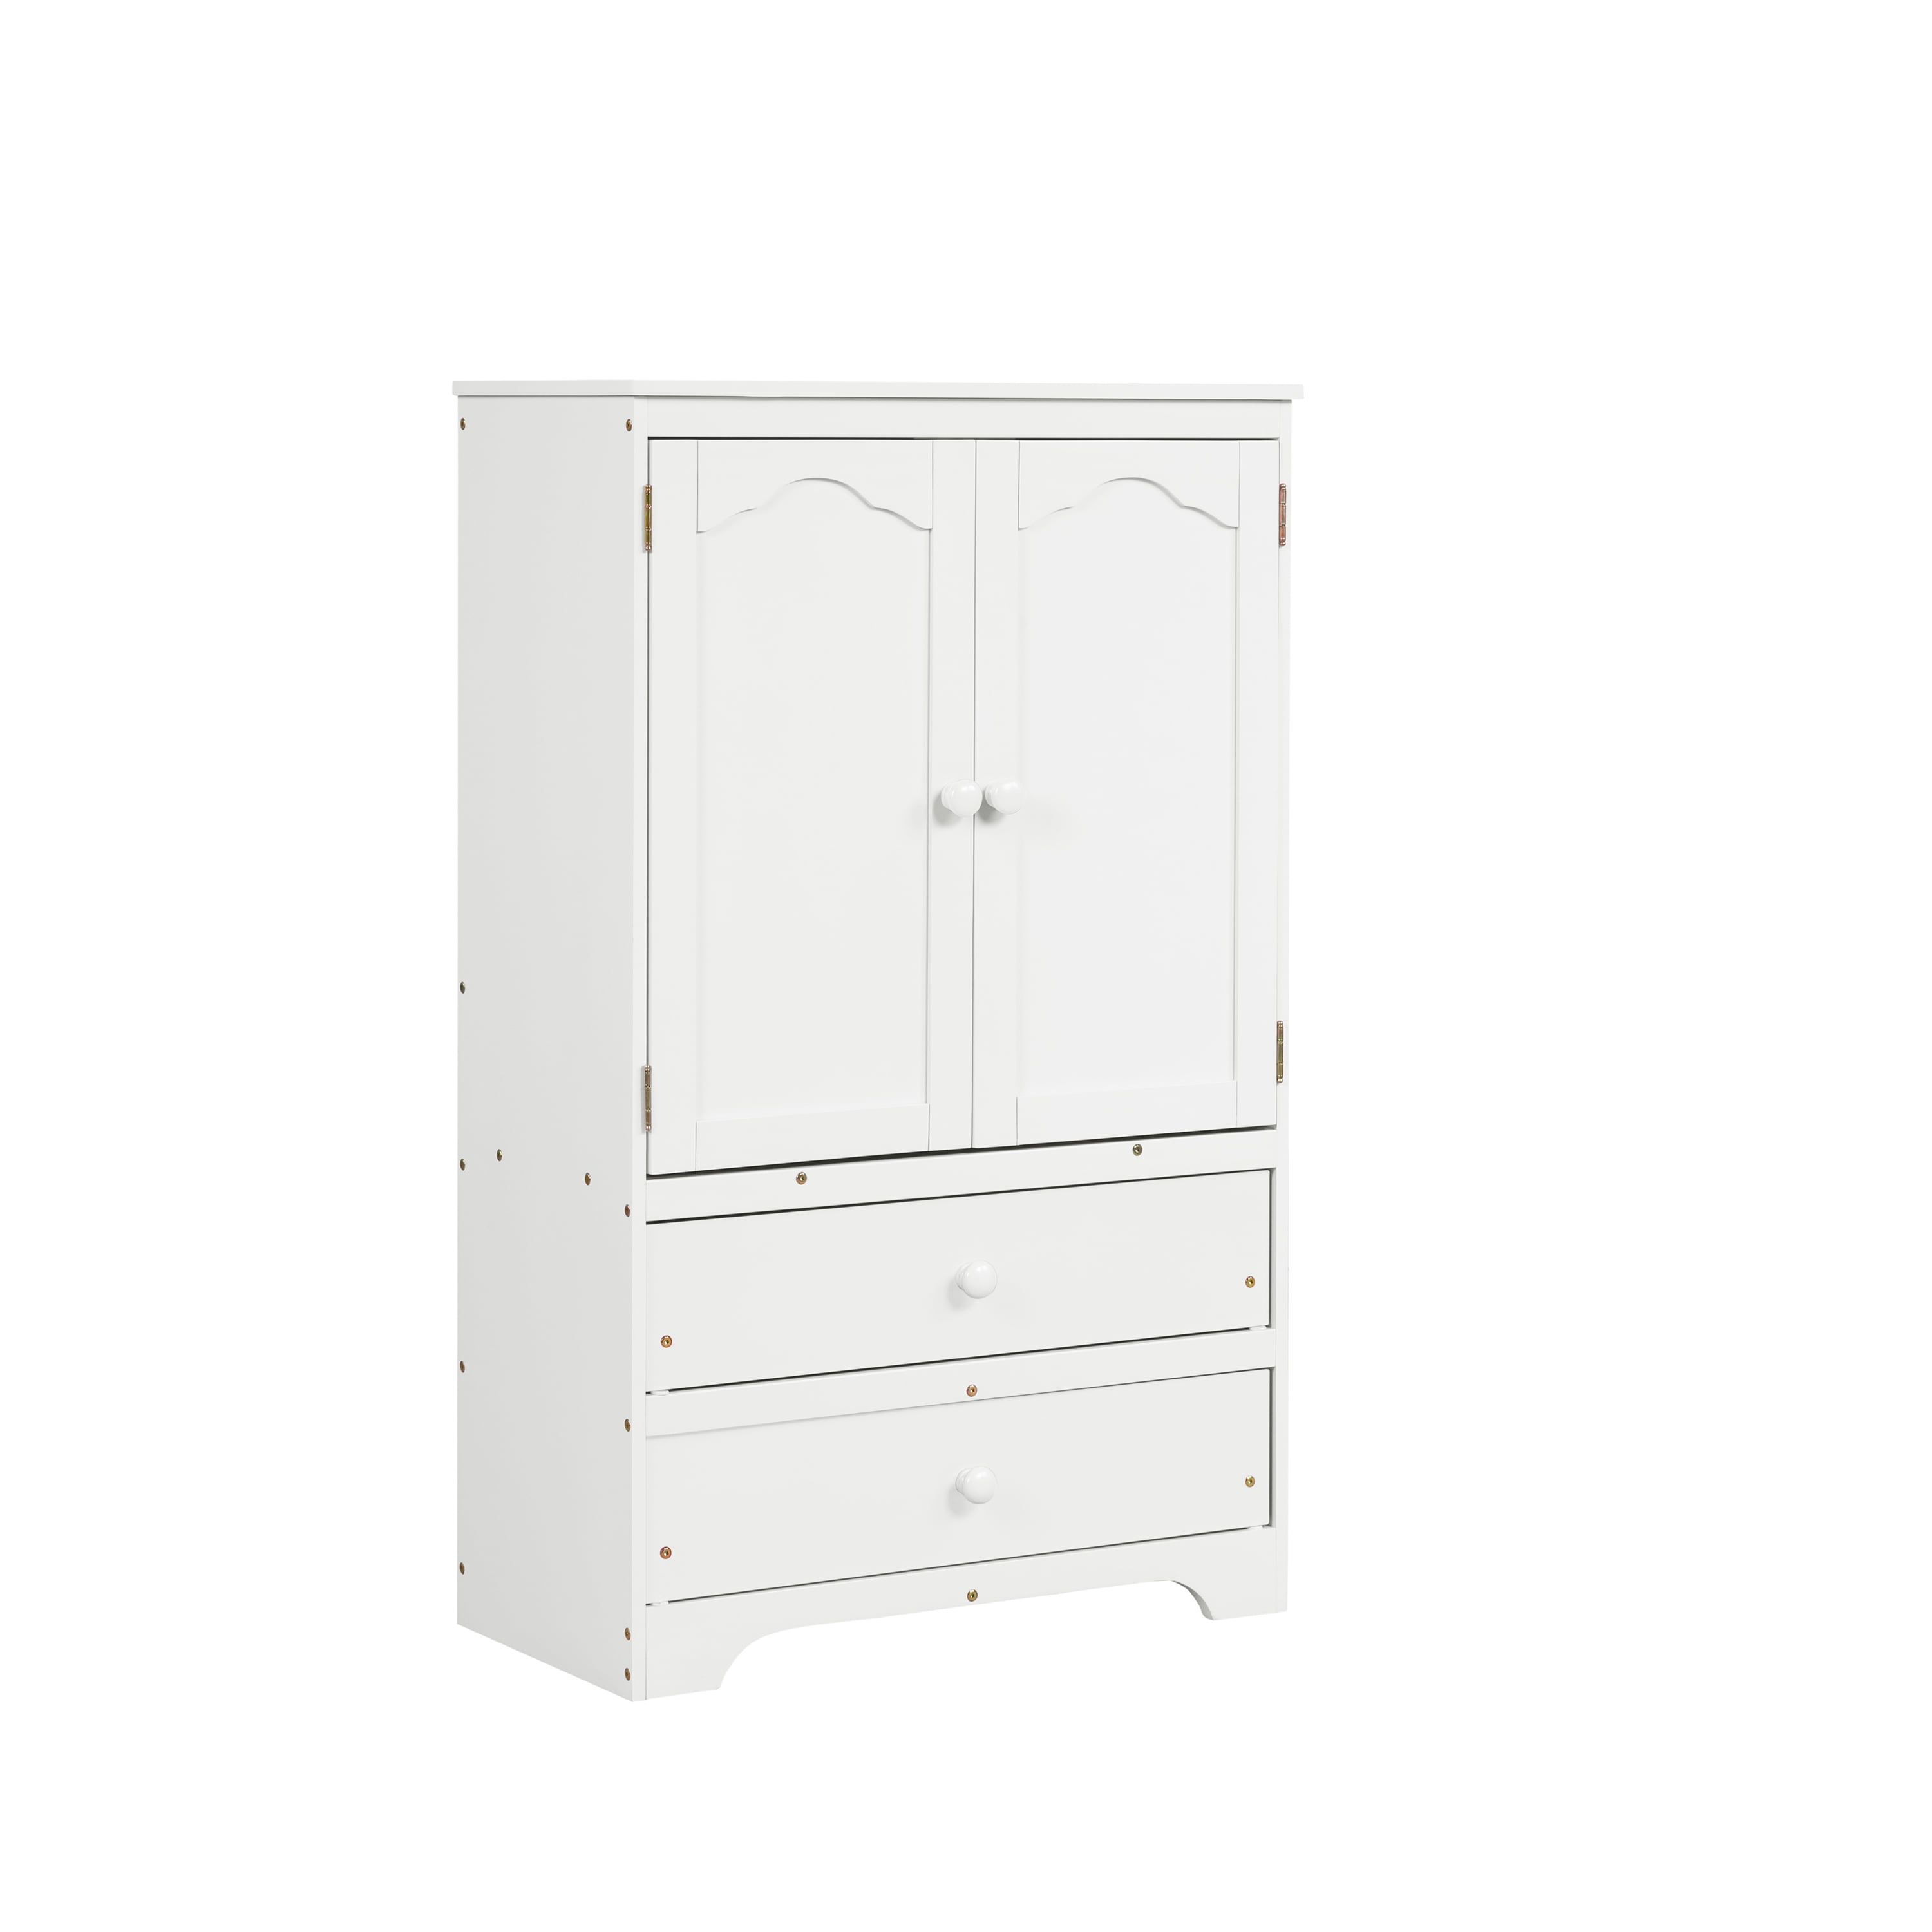 Inclake Pine Wood Kids Play Wardrobe With 2 Doors And 2 Drawers, Children  Dress Up Storage Side Cabinet Clothes Hanging Closet With A Clothes Rail  And A Adjustable Shelf, White – Walmart Inside White And Pine Wardrobes (Gallery 3 of 12)